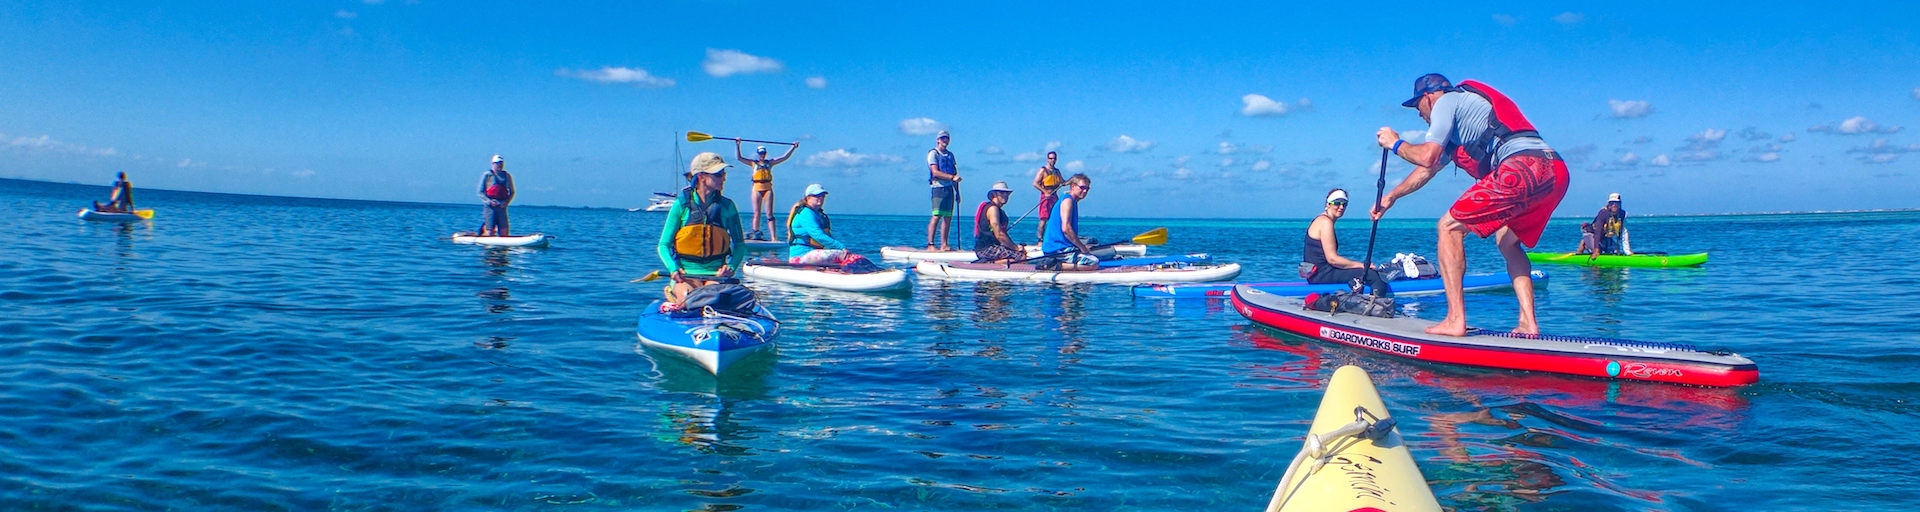 Glovers SUP Adventure and Skills Camp with Norm Hann